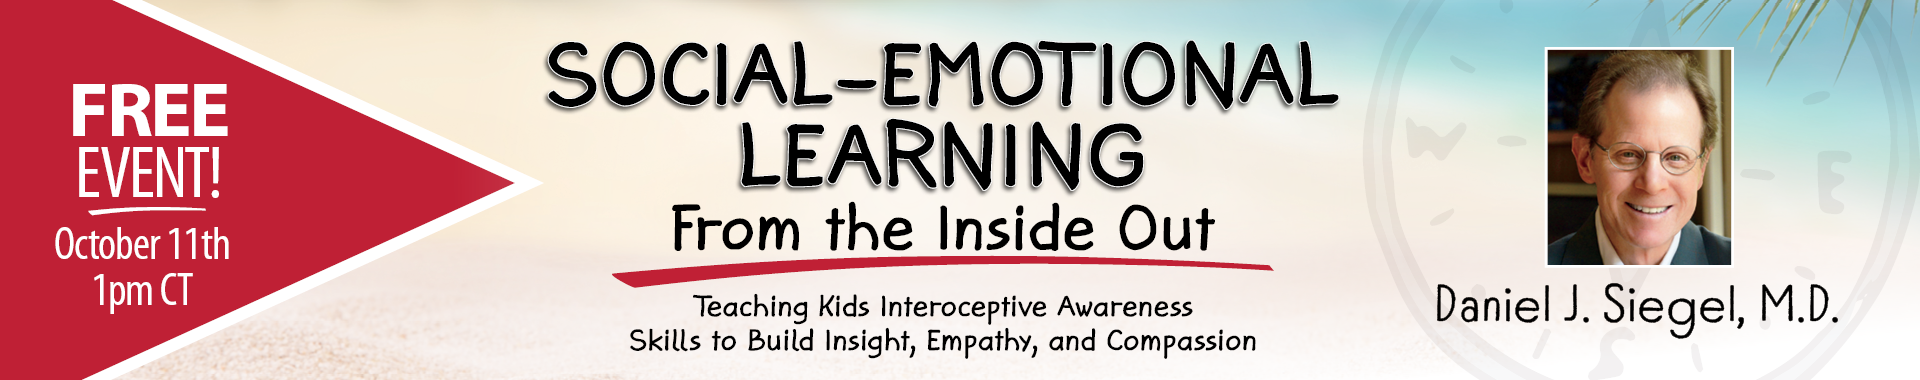 Social-Emotional Learning from the Inside Out: Teaching Kids Interoceptive Awareness Skills to Build Insight, Empathy, and Compassion